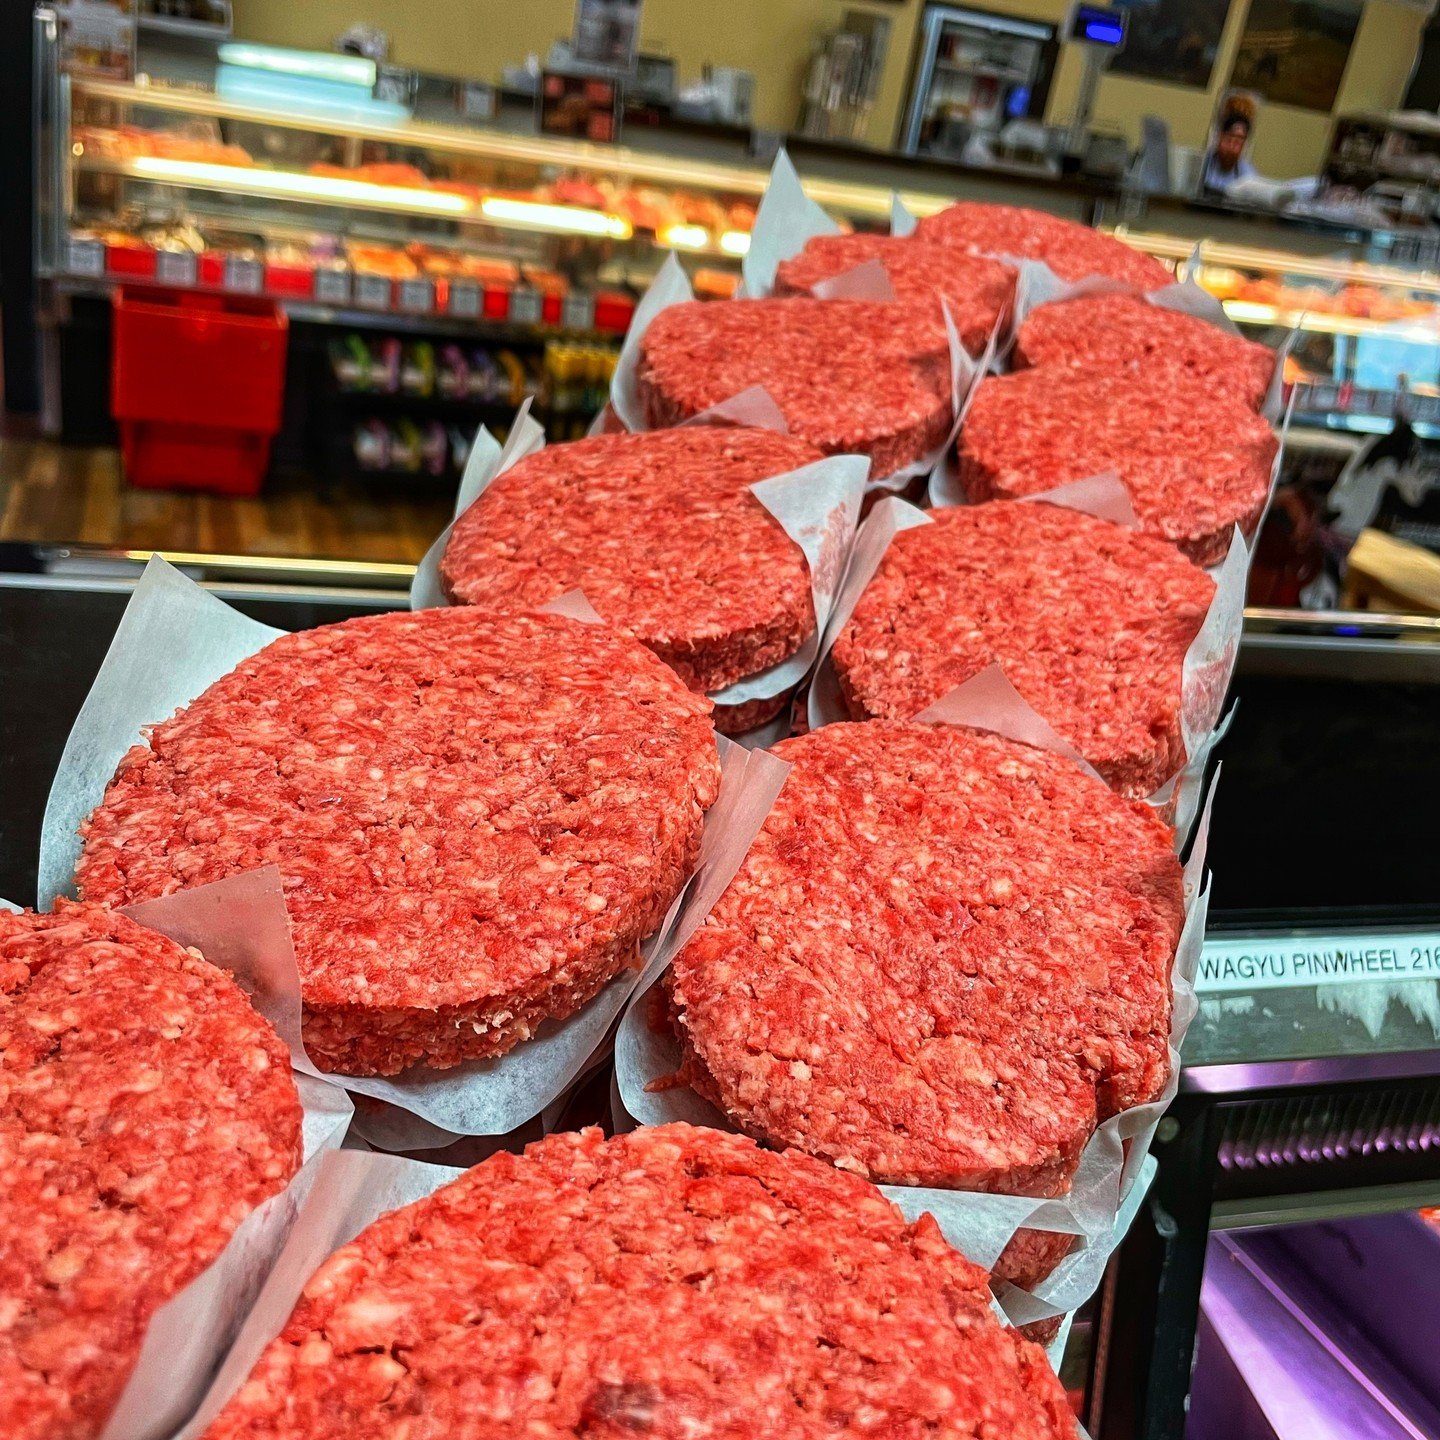 It&rsquo;s looking like a good grilling day! The BEST burgers are made with our American Wagyu patties. Fresh in the case for you ;)